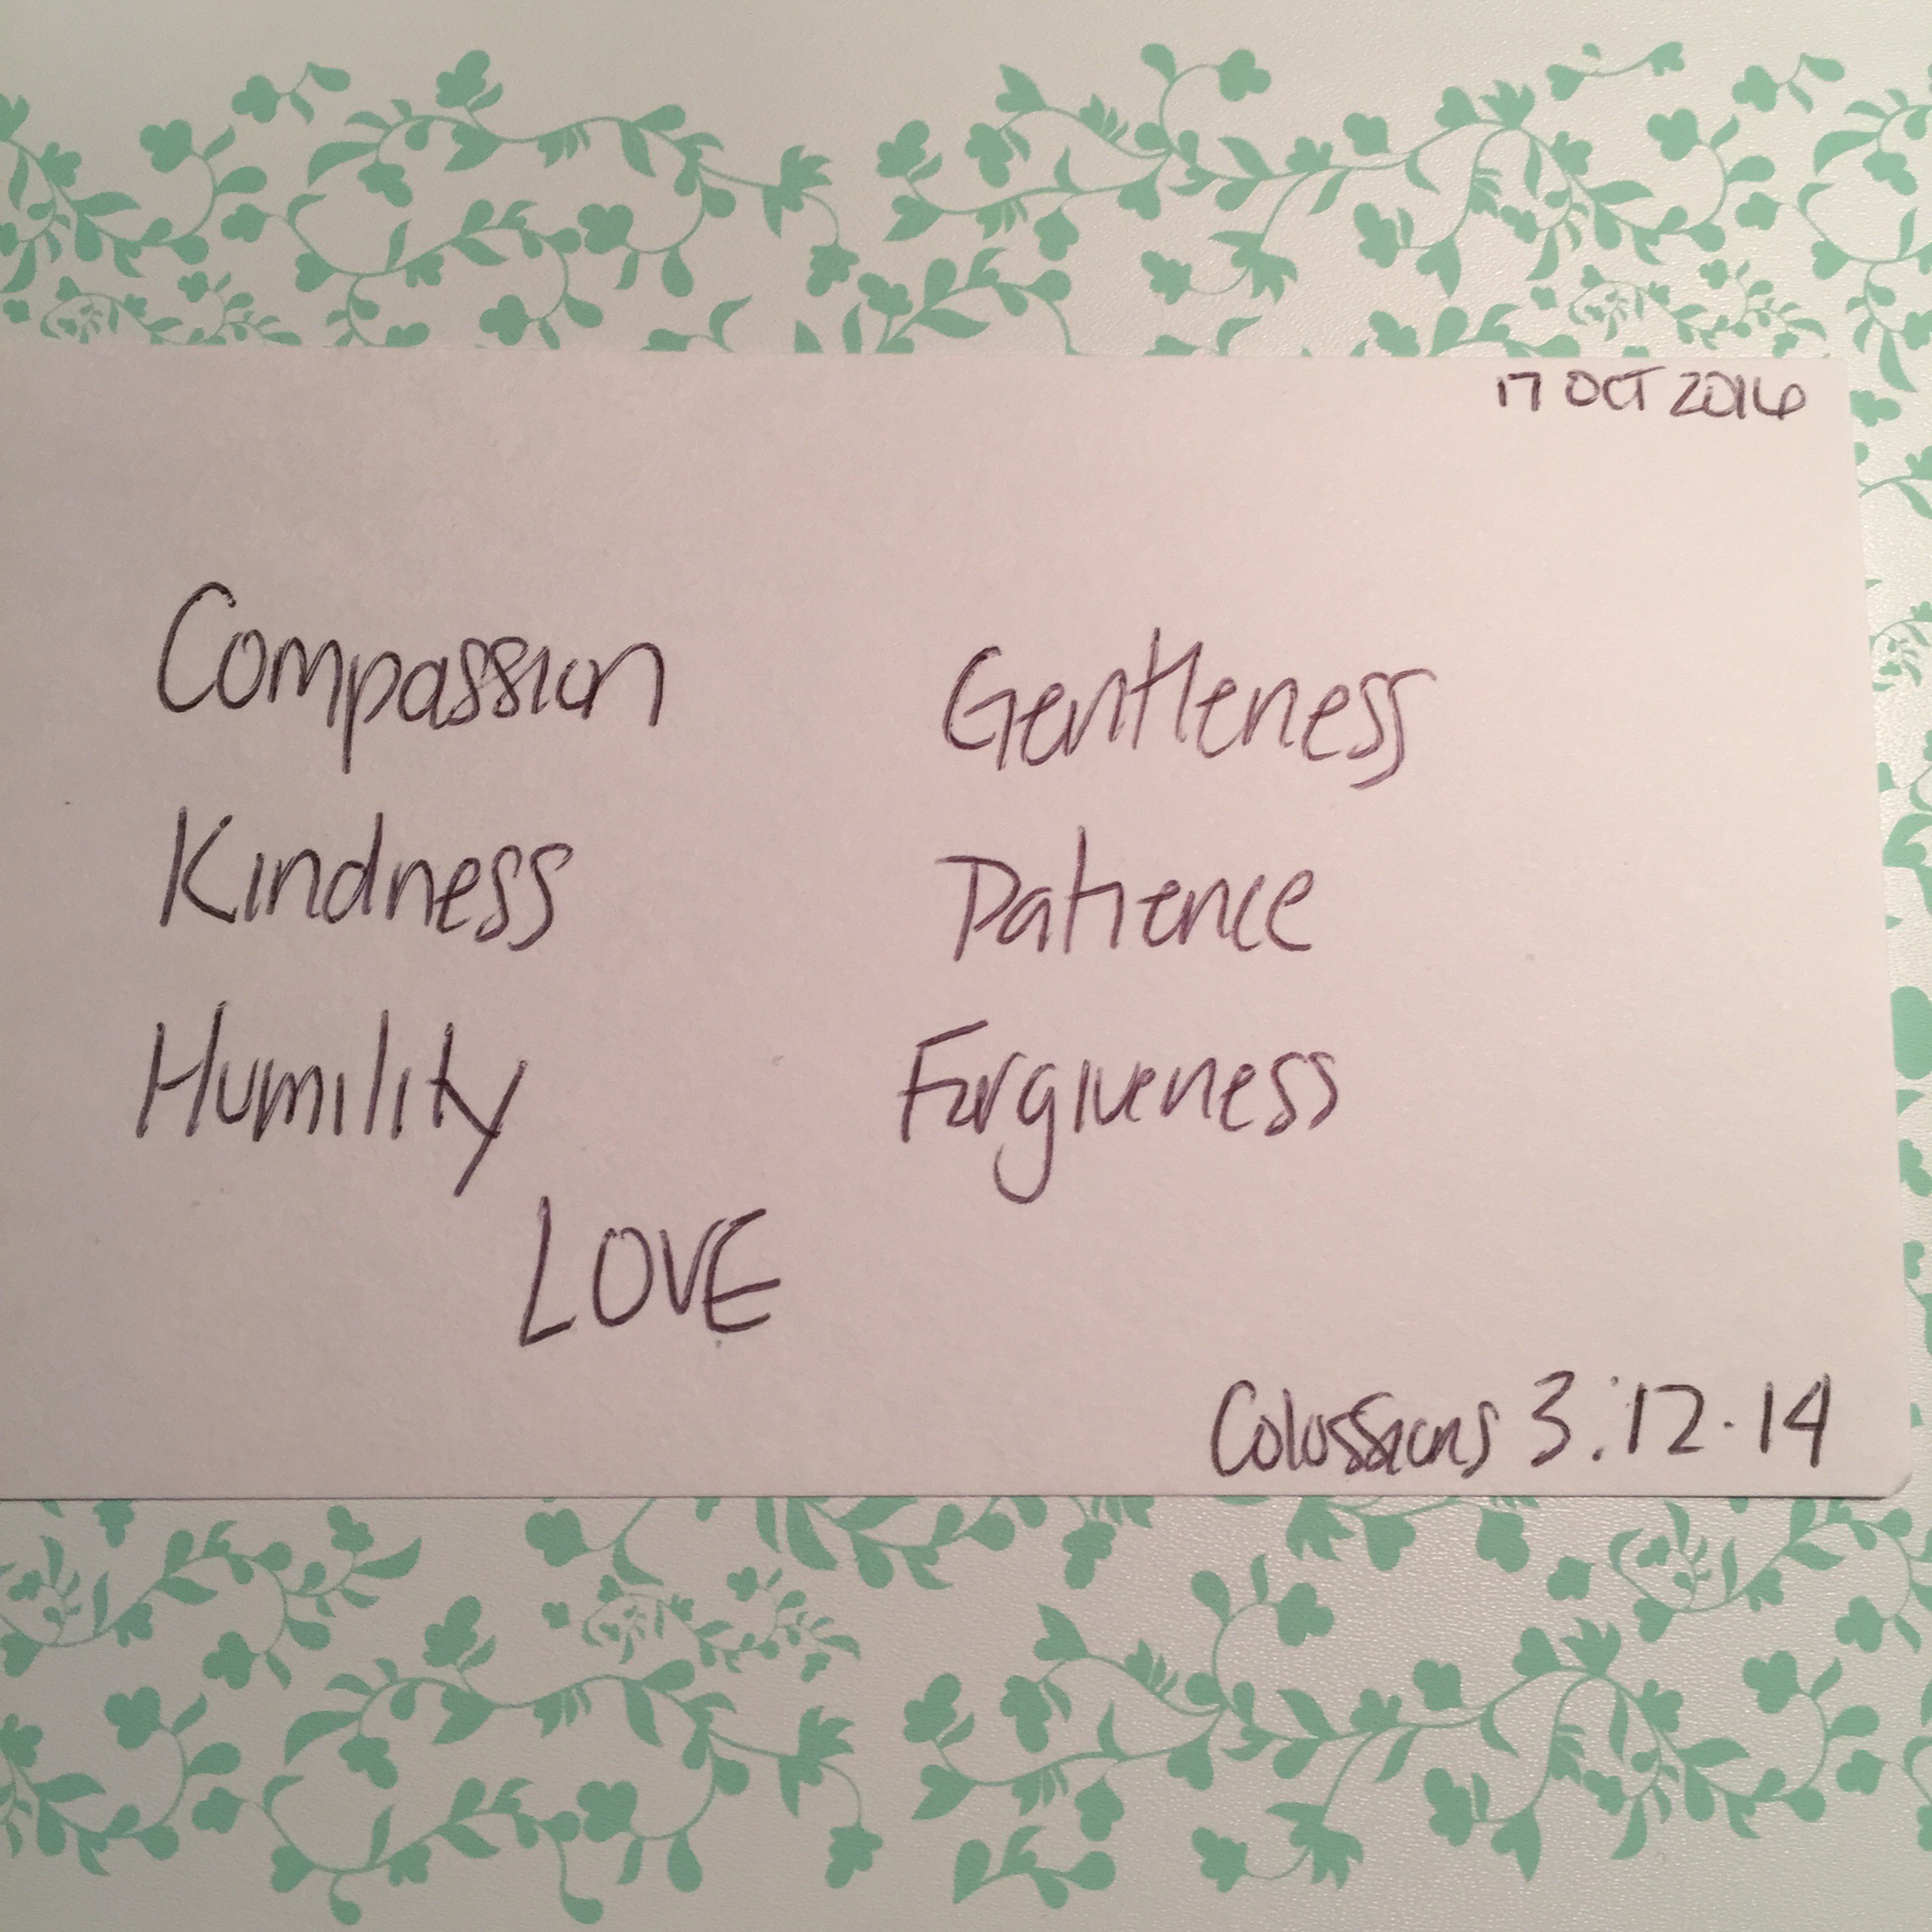 A few virtues to ponder & share…